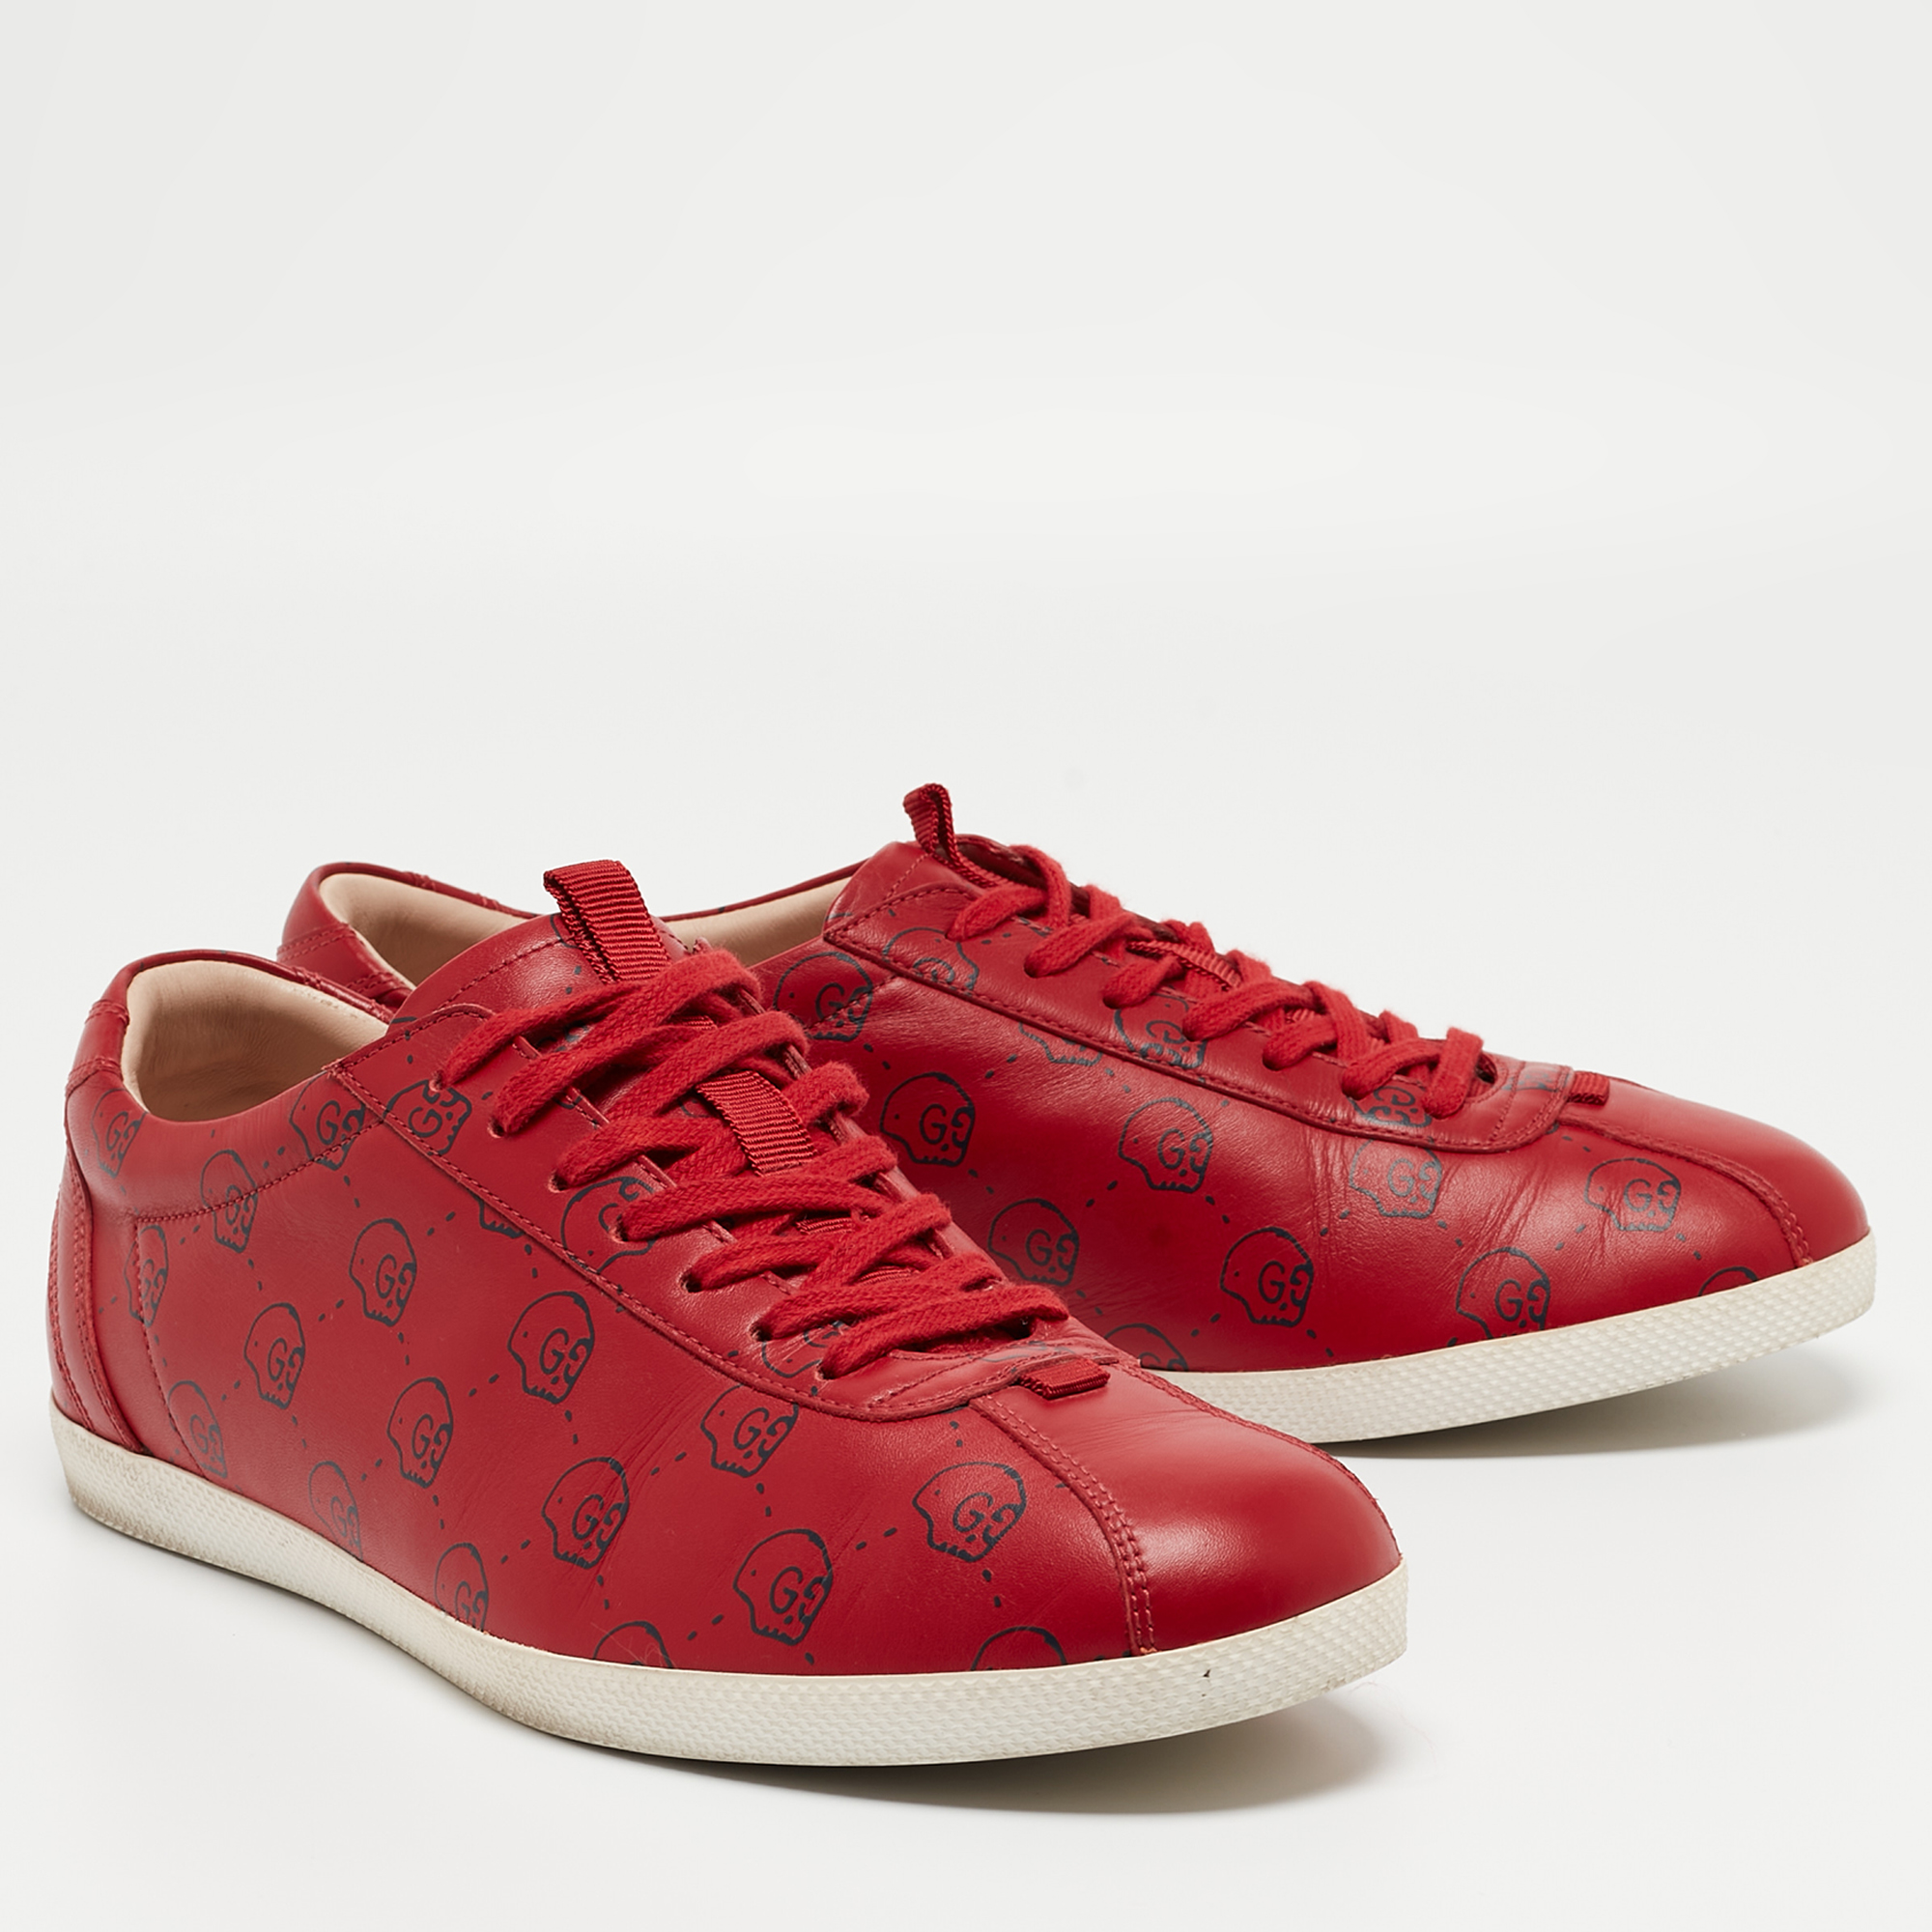 Gucci Red Leather Gucci Ghost Print Low Top Sneakers Size 42.5